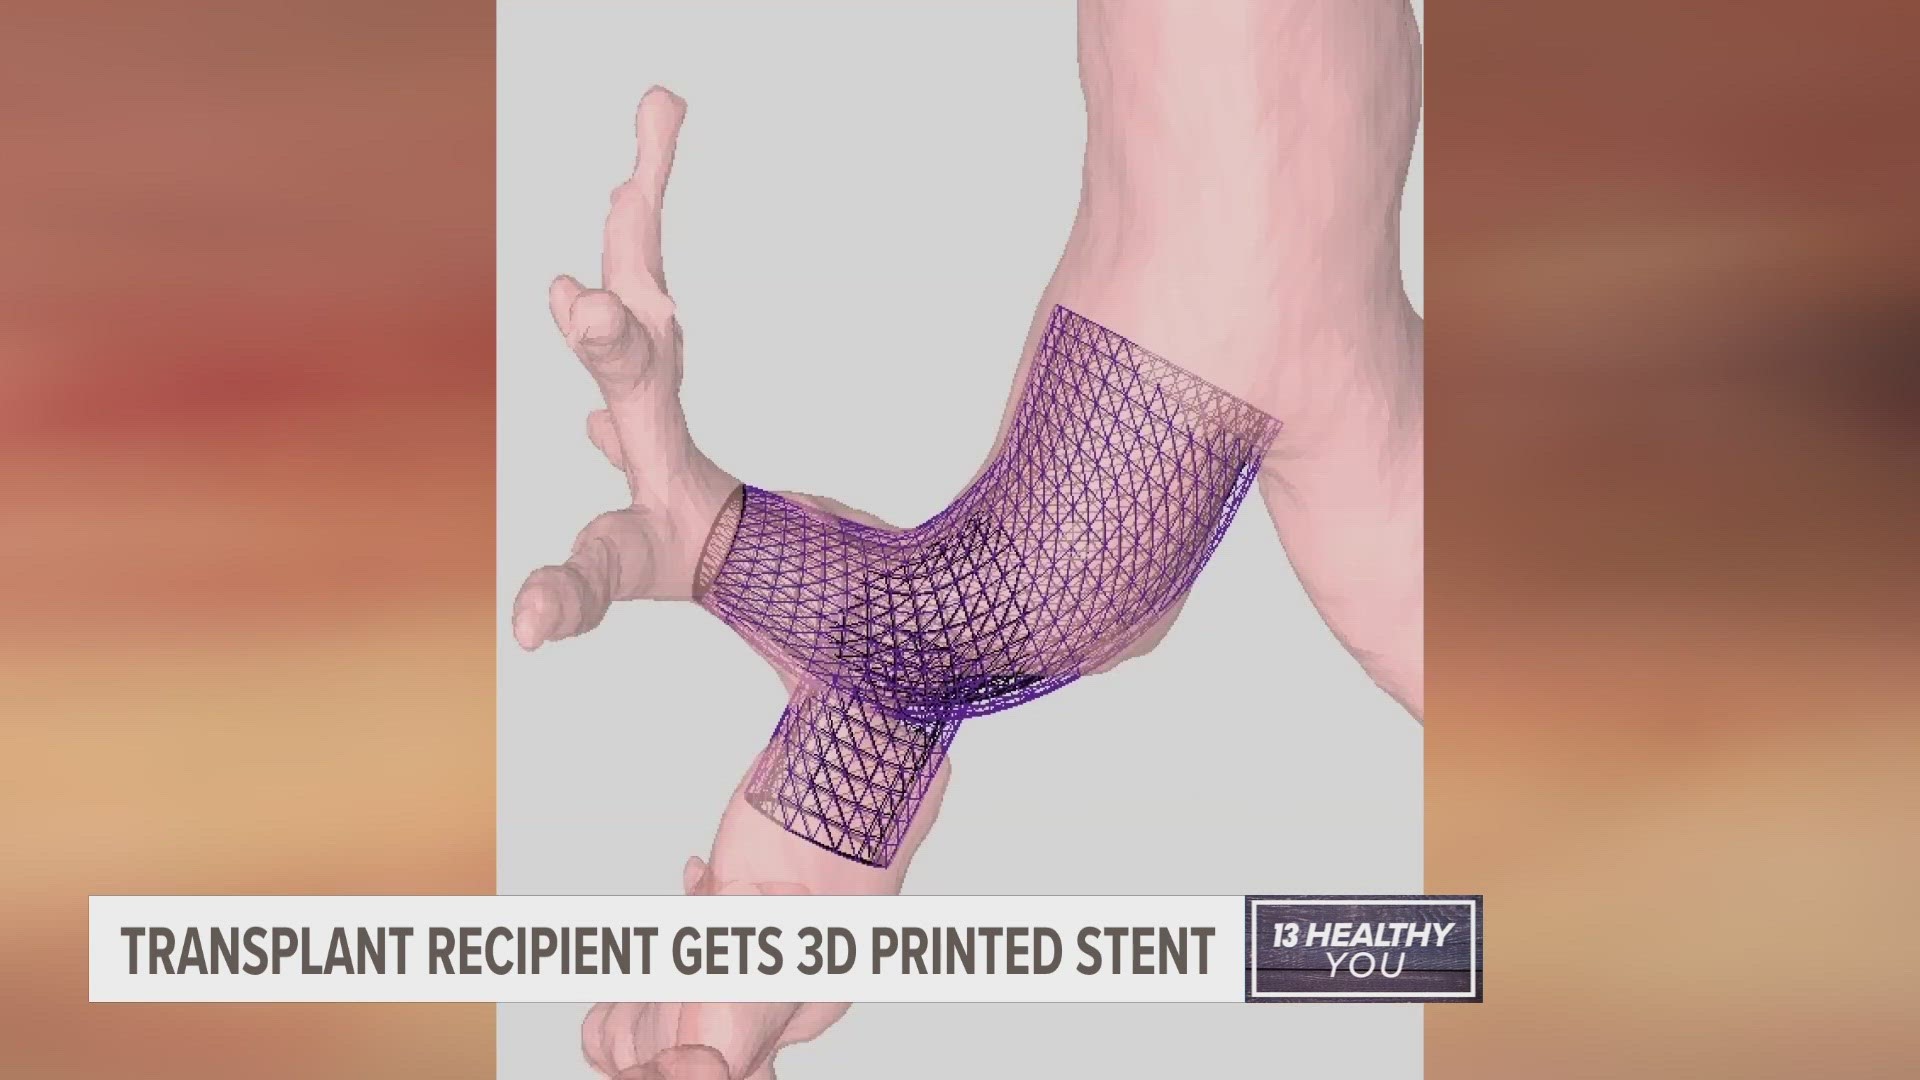 The 3D printed silicone stent for Wayne Morgan's lung airway is the first of its kind at Corewell Health.